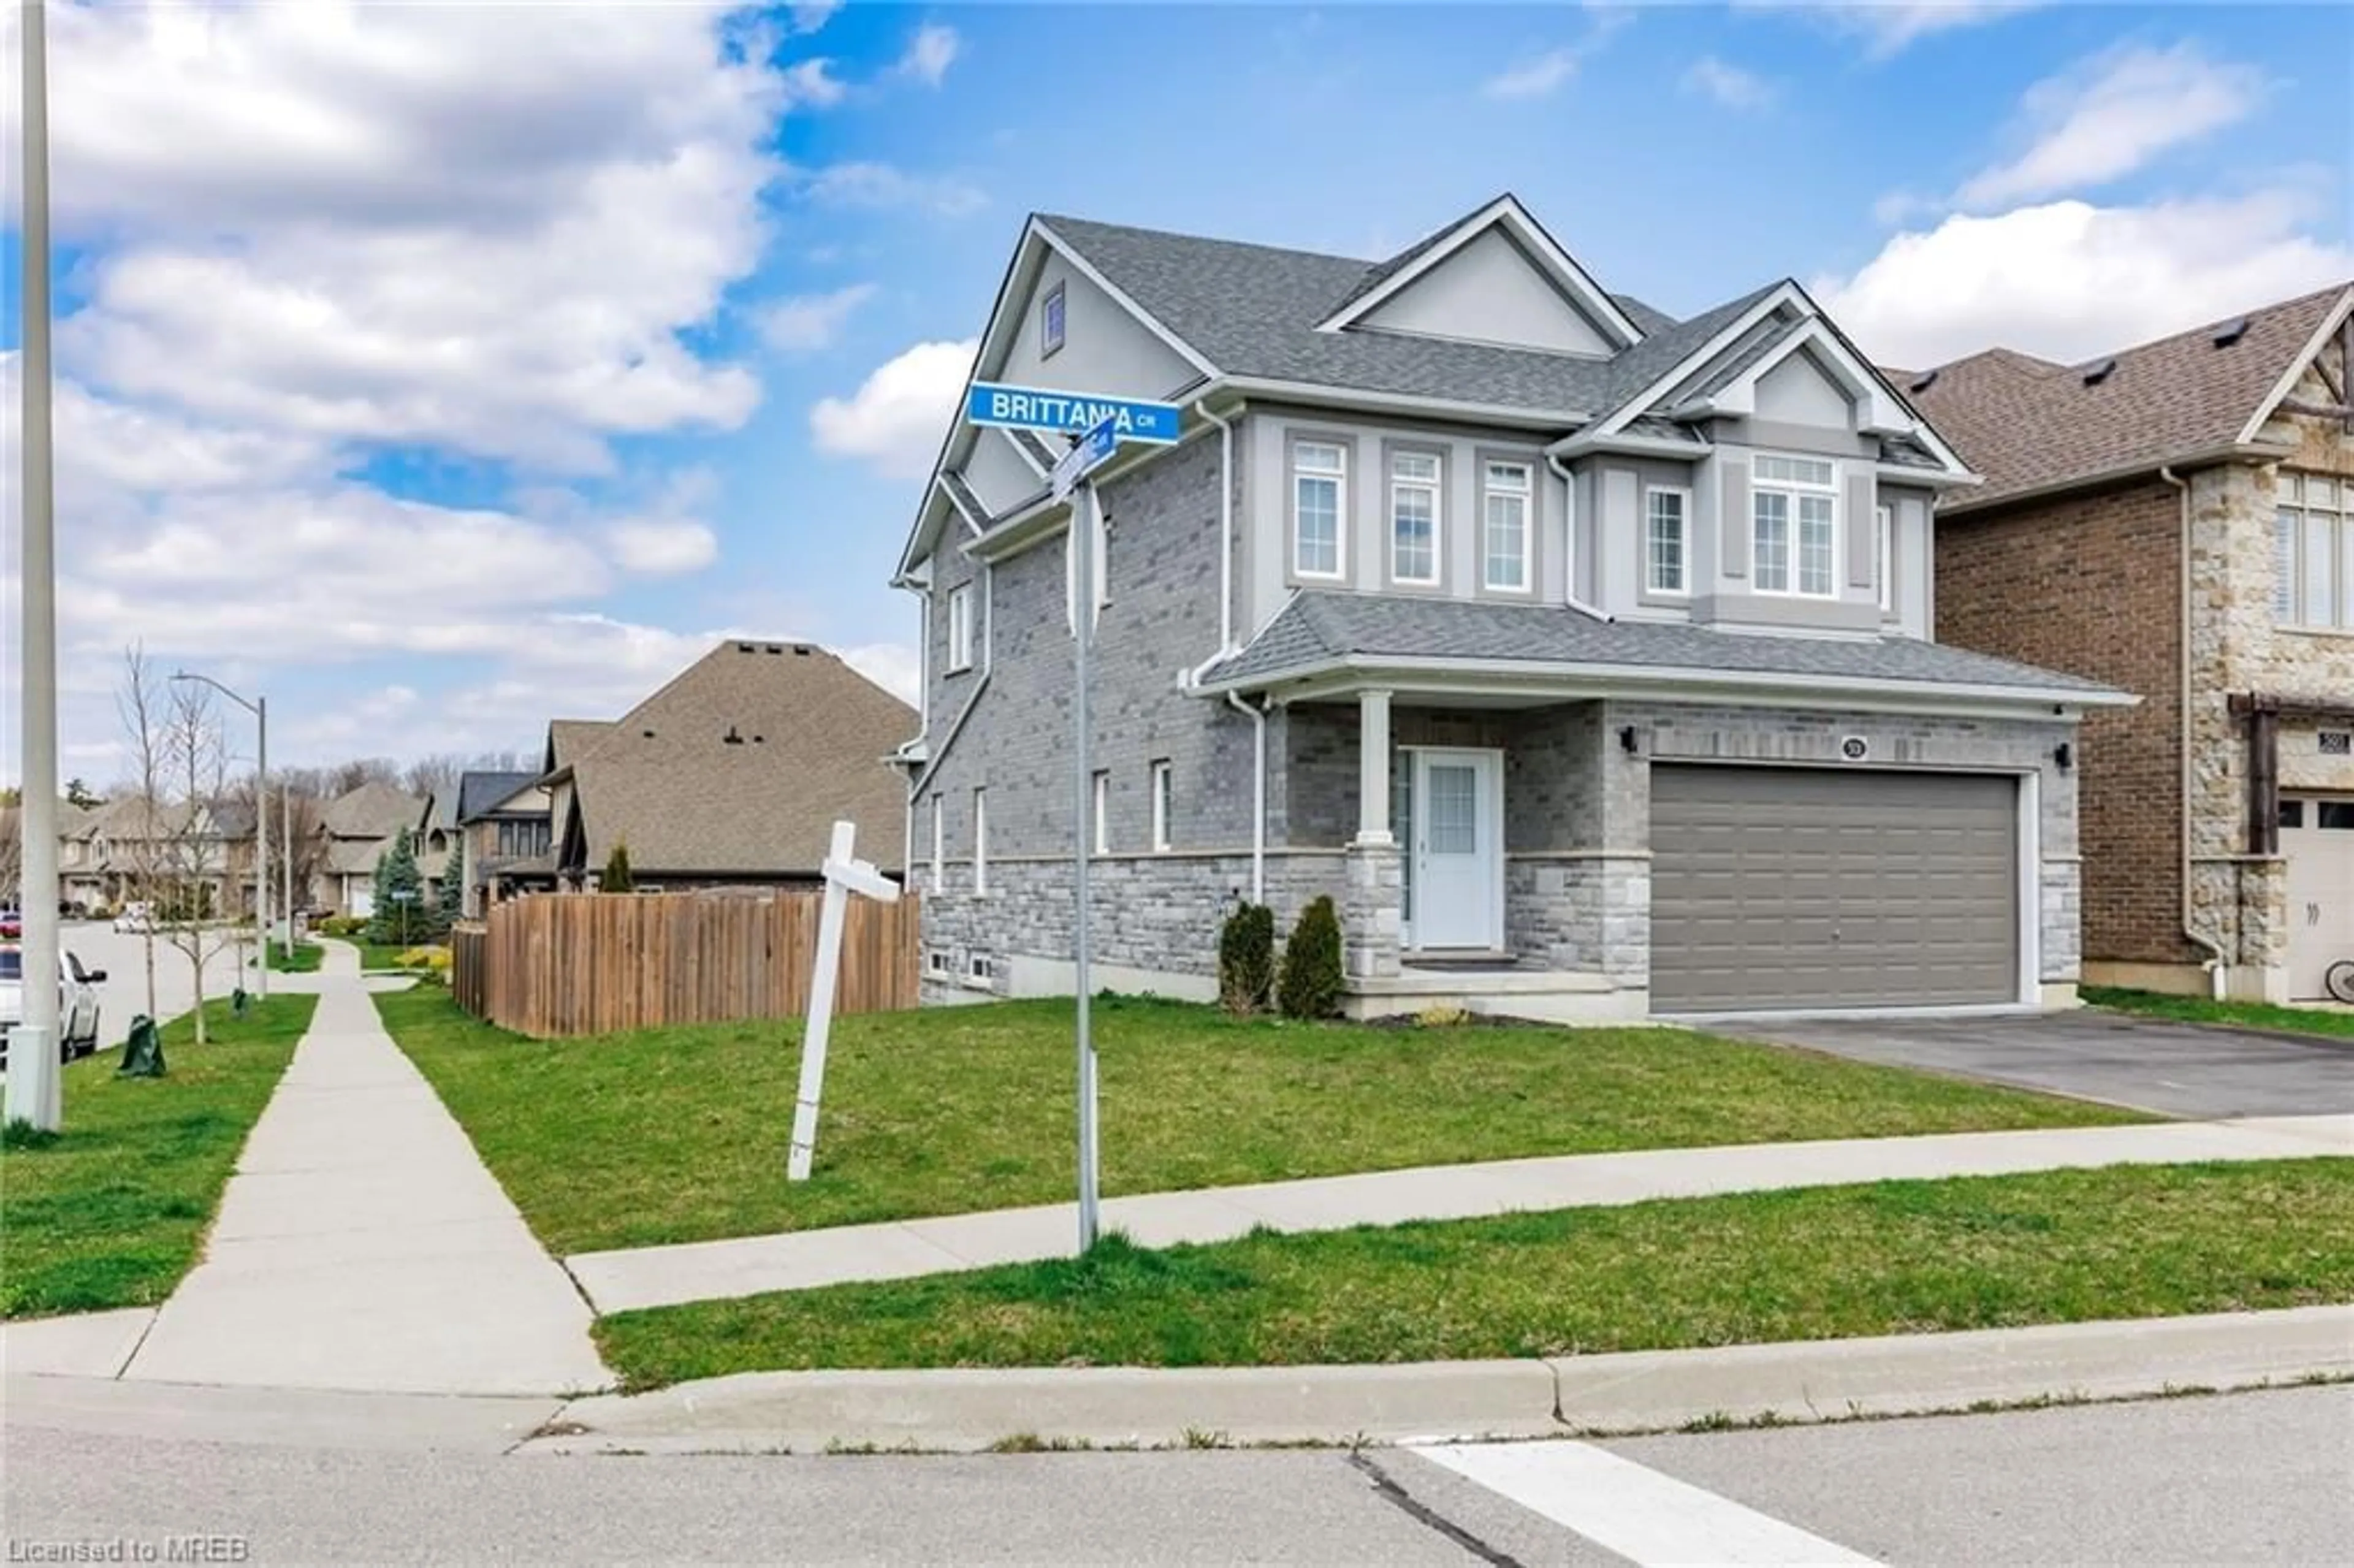 Frontside or backside of a home for 501 Brittania Cres, Kitchener Ontario N2R 1Y9